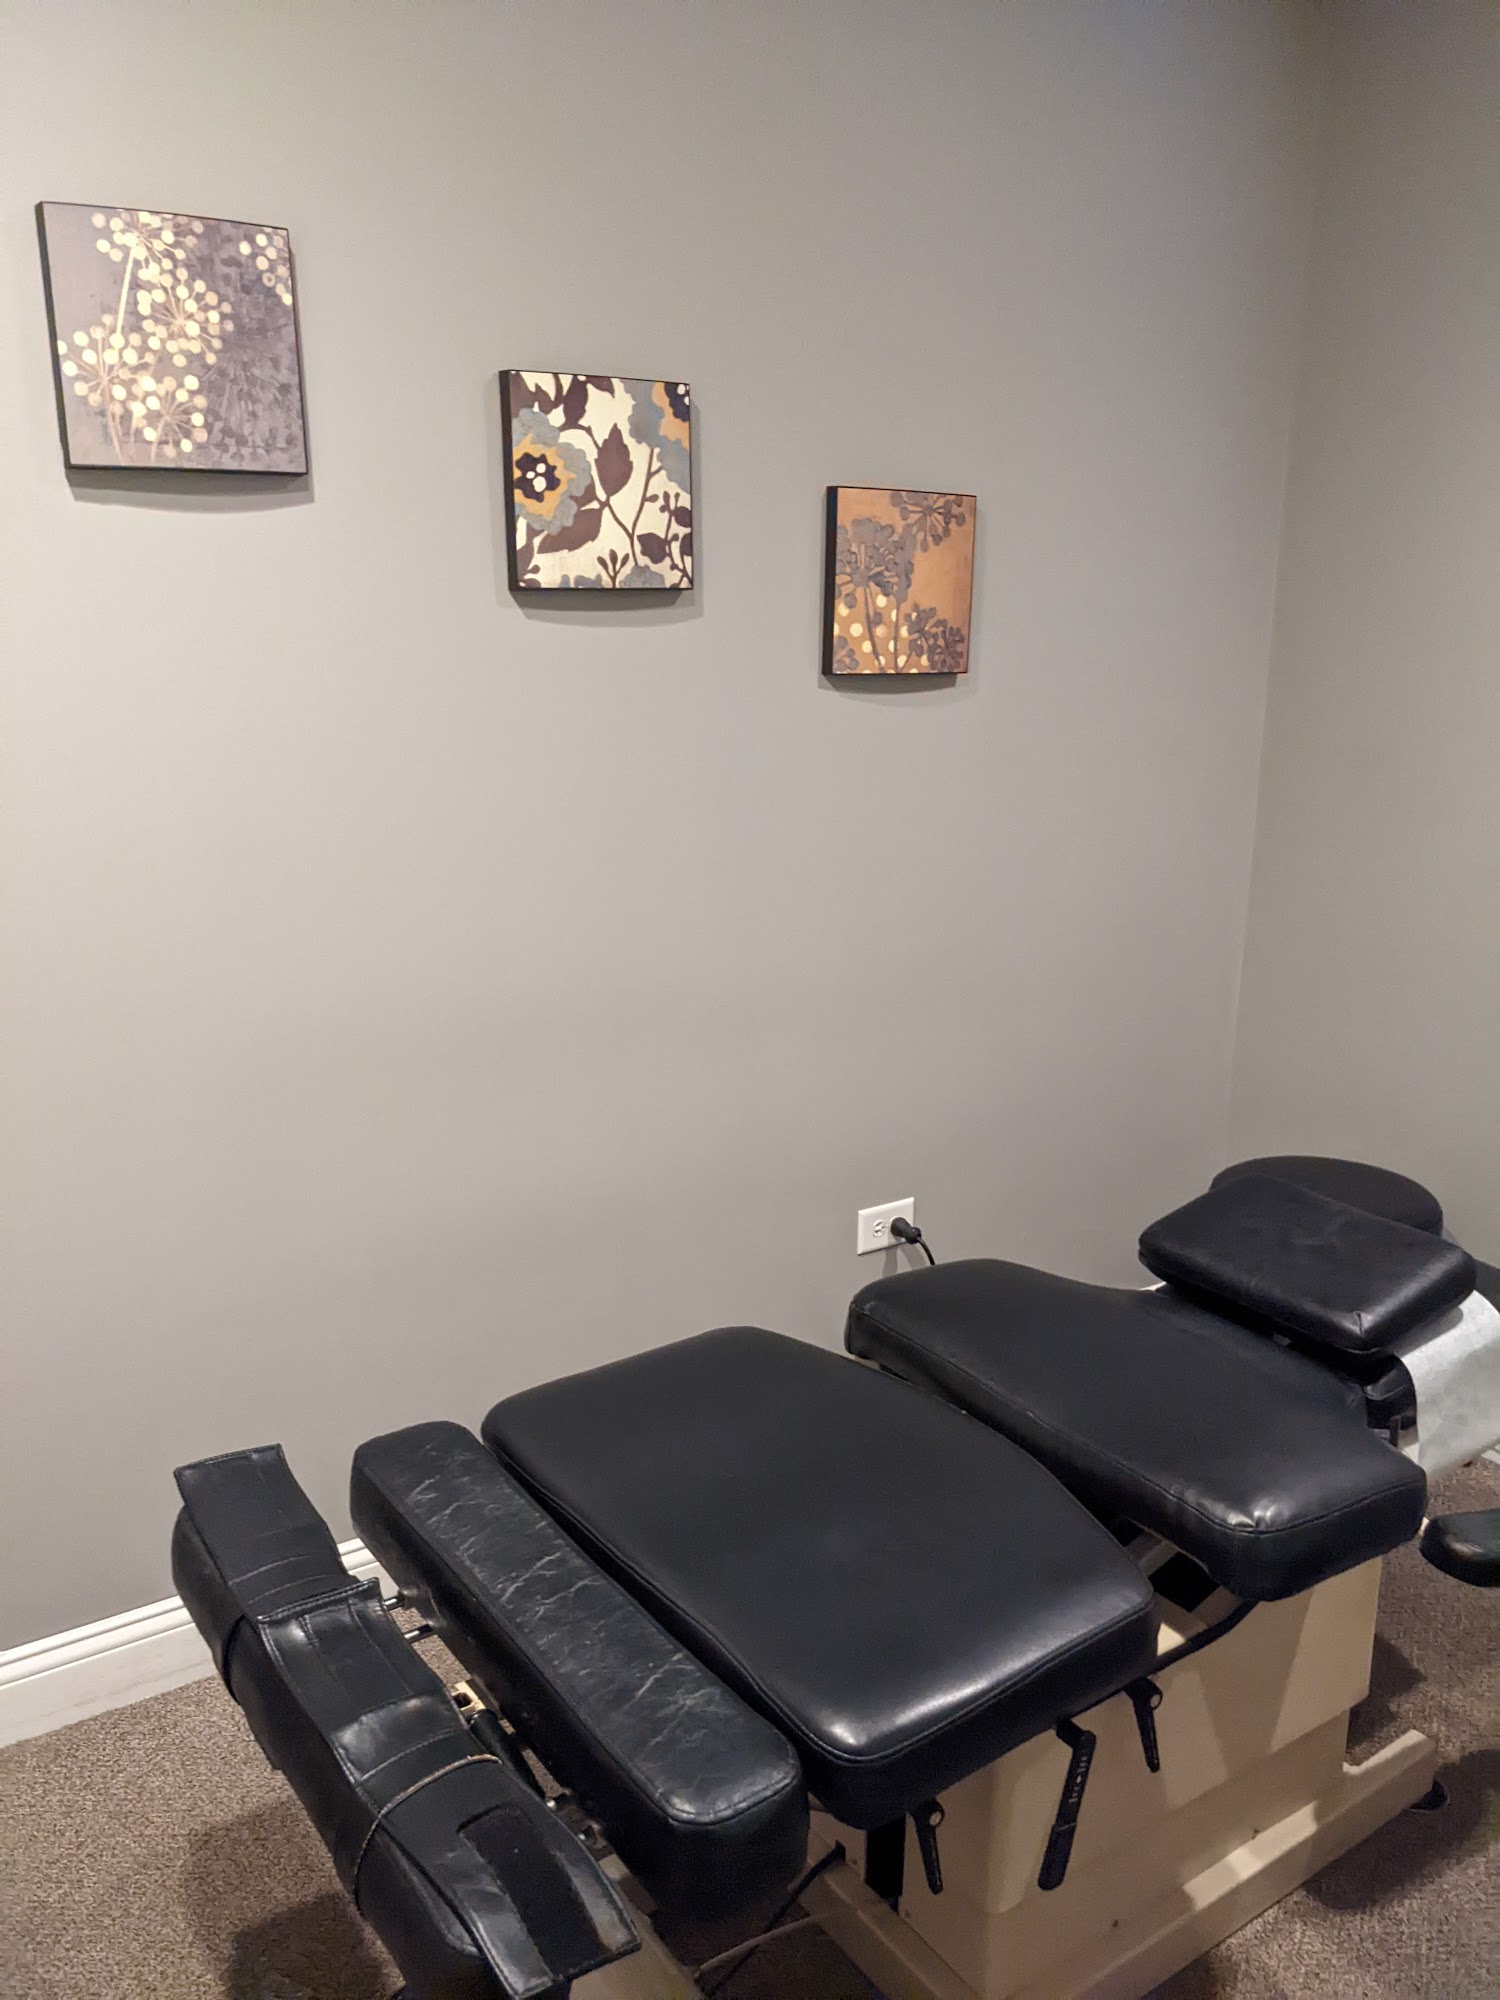 Back In Balance Chiropractic & Acupuncture Center 518 Hillgrove Ave #275, Western Springs Illinois 60558